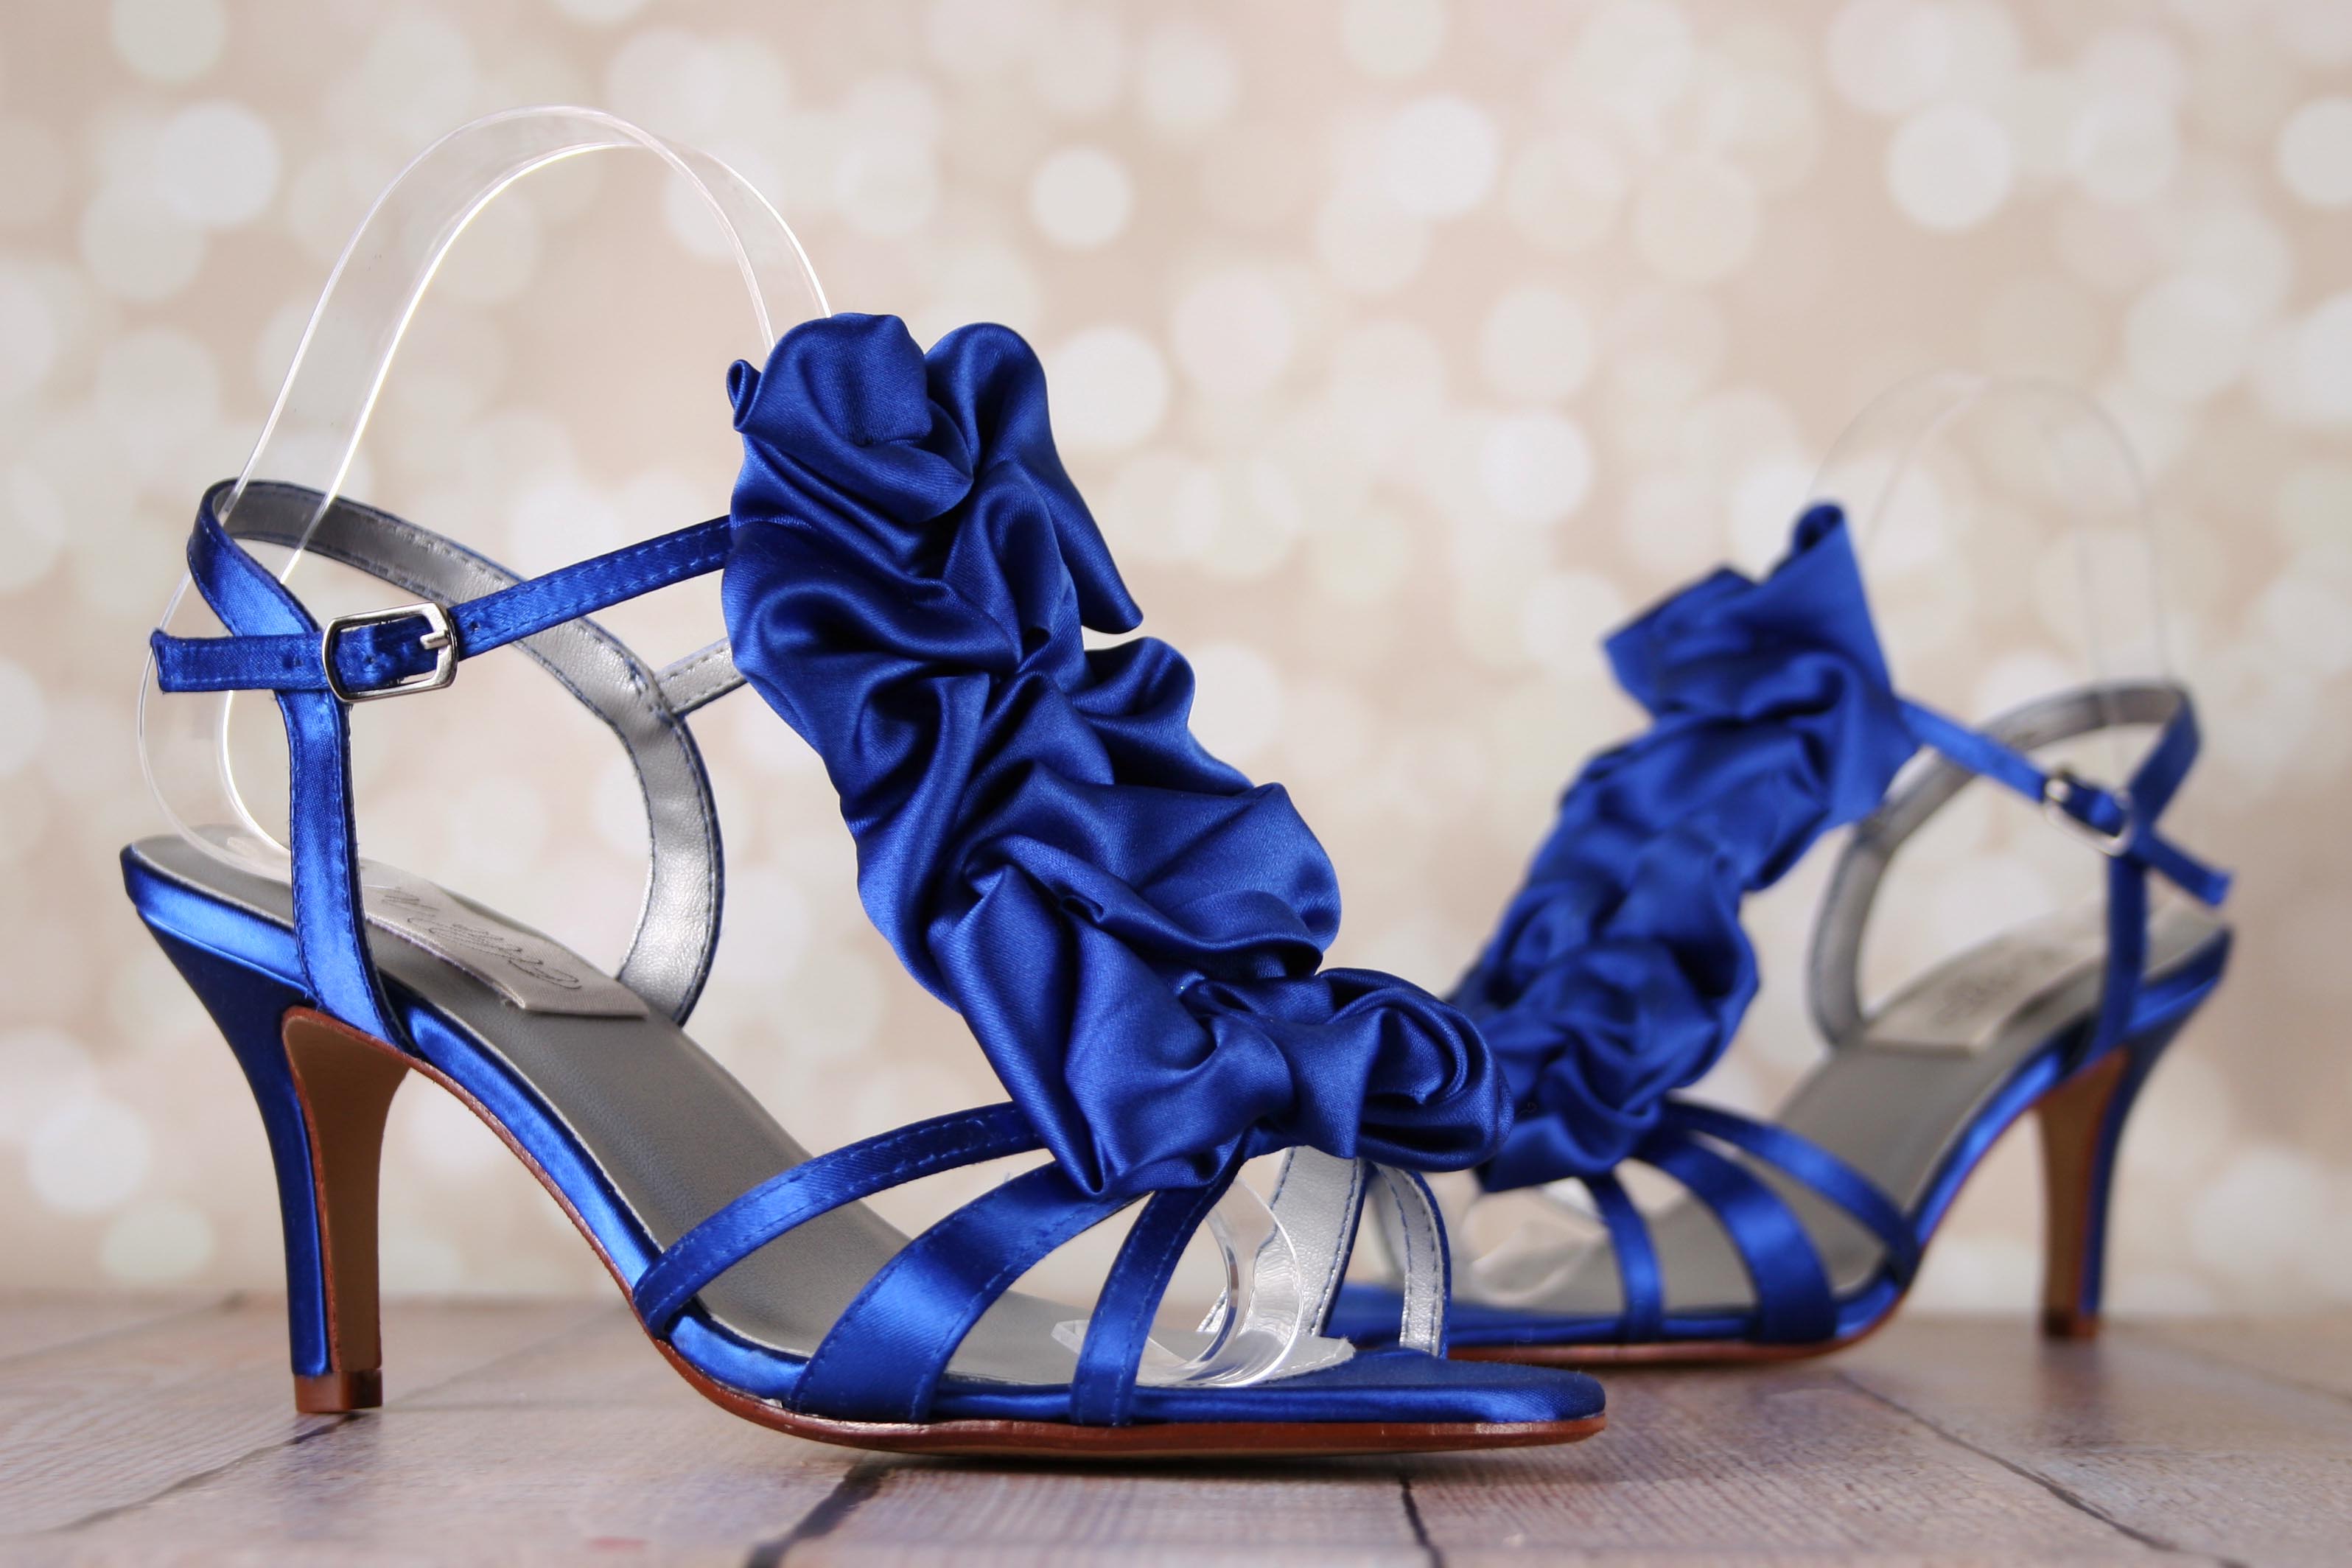 Royal Blue Wedding Shoes: Strappy Sandal Bridal Shoes with Handmade